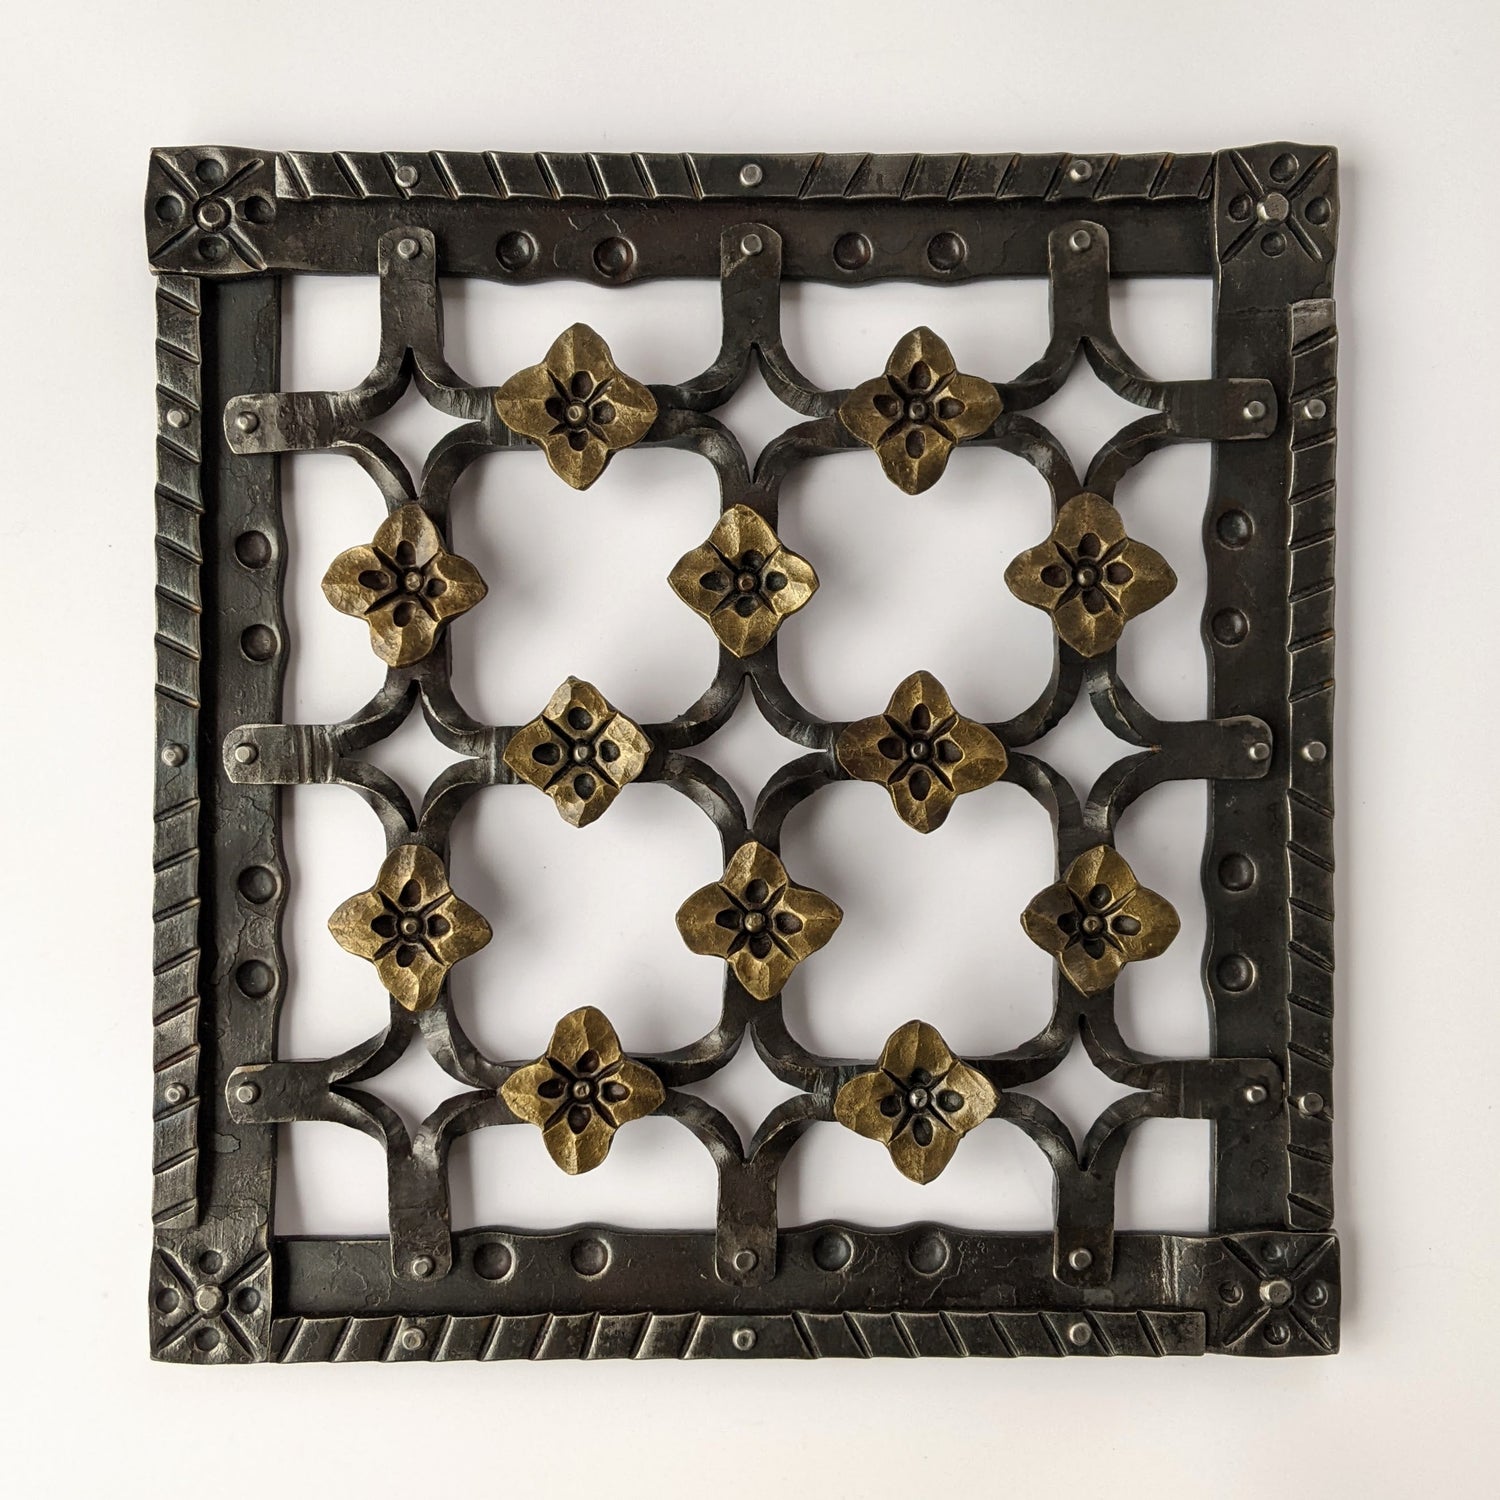 Hand forged wall art, decorated with heavy texture, flowers and diamond shapes.